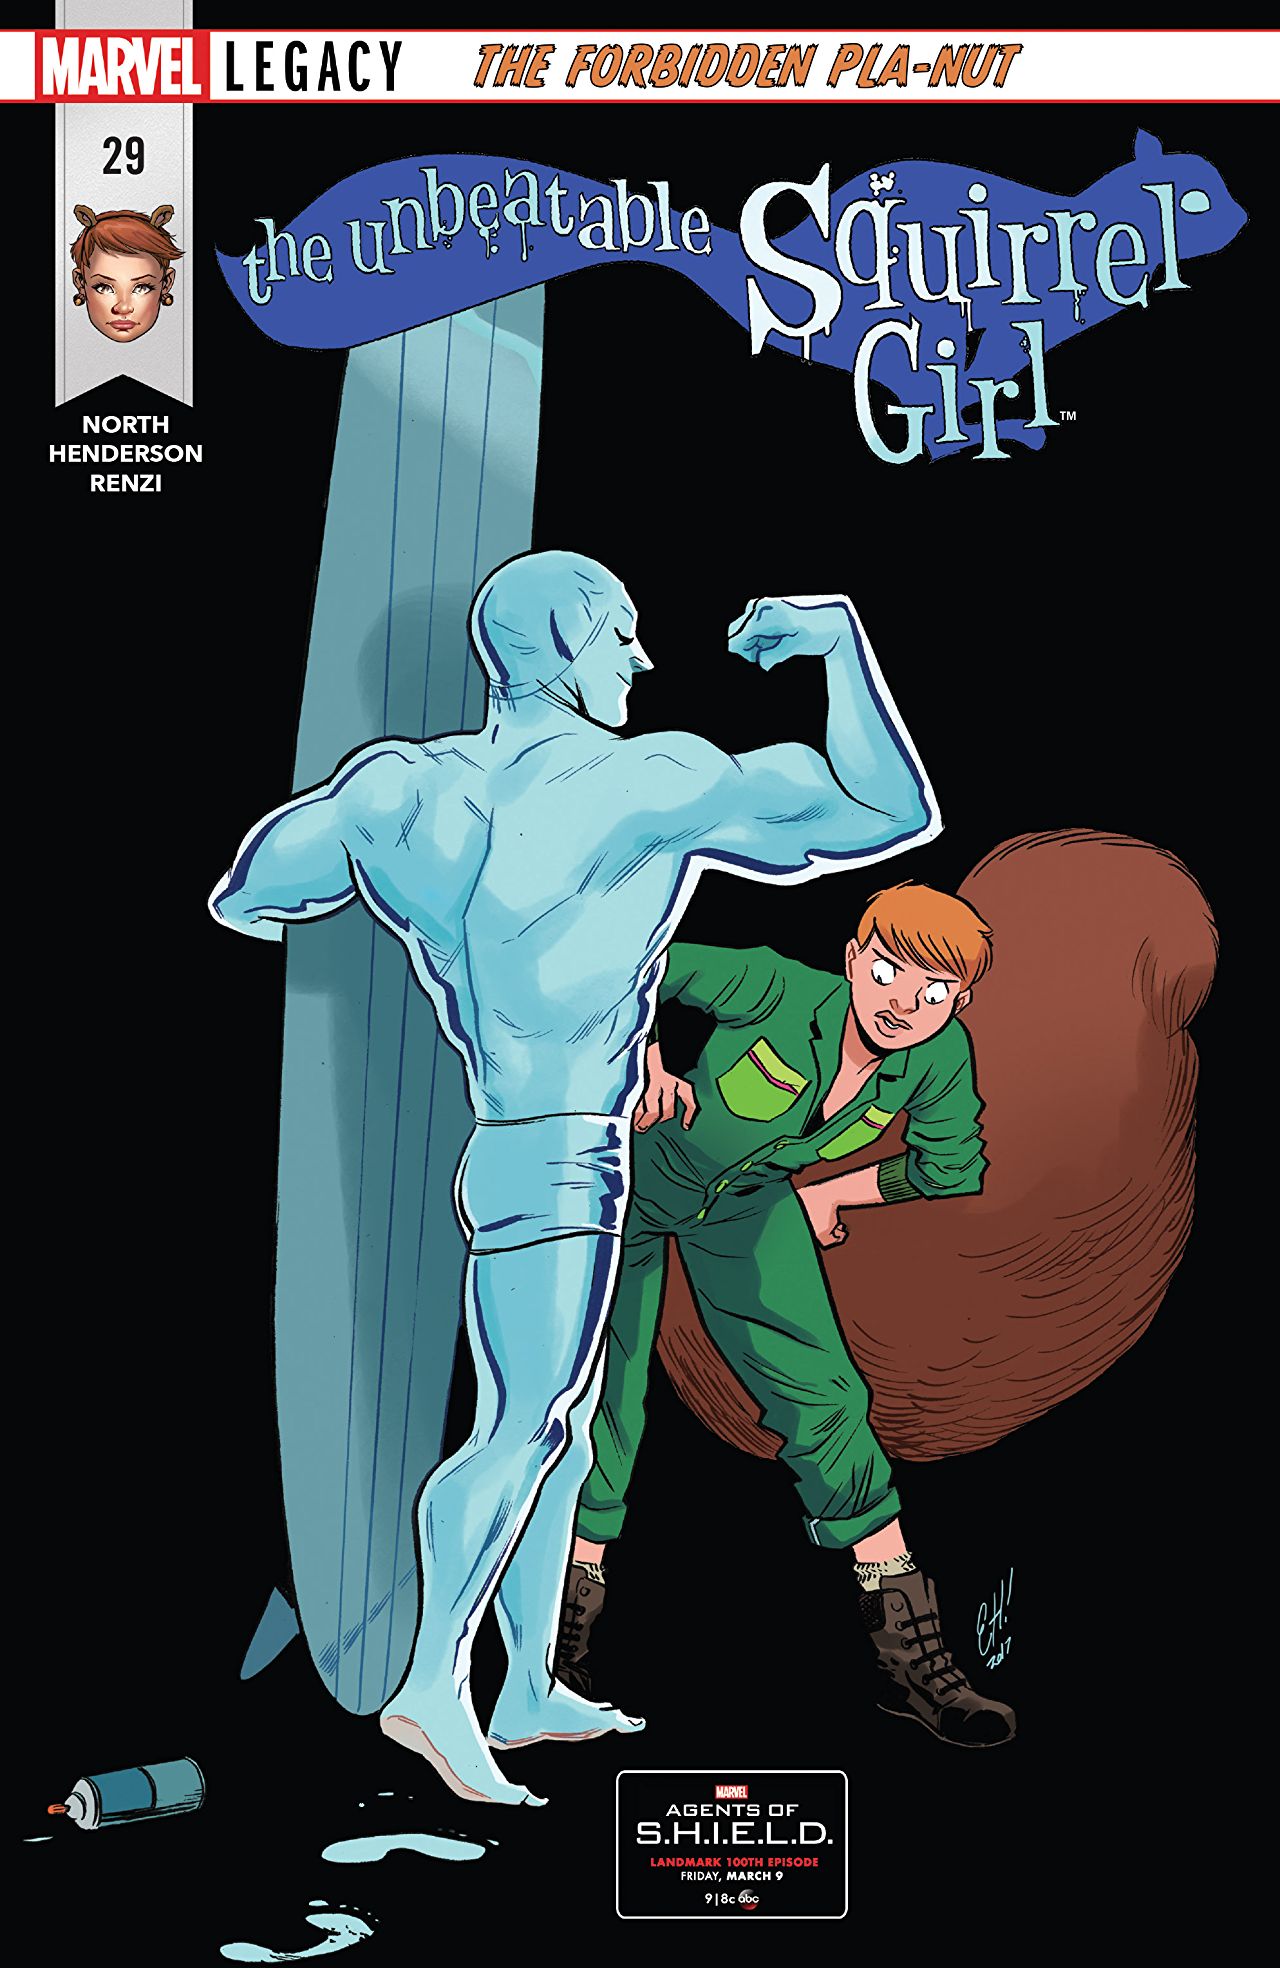 The Unbeatable Squirrel Girl #29 Review